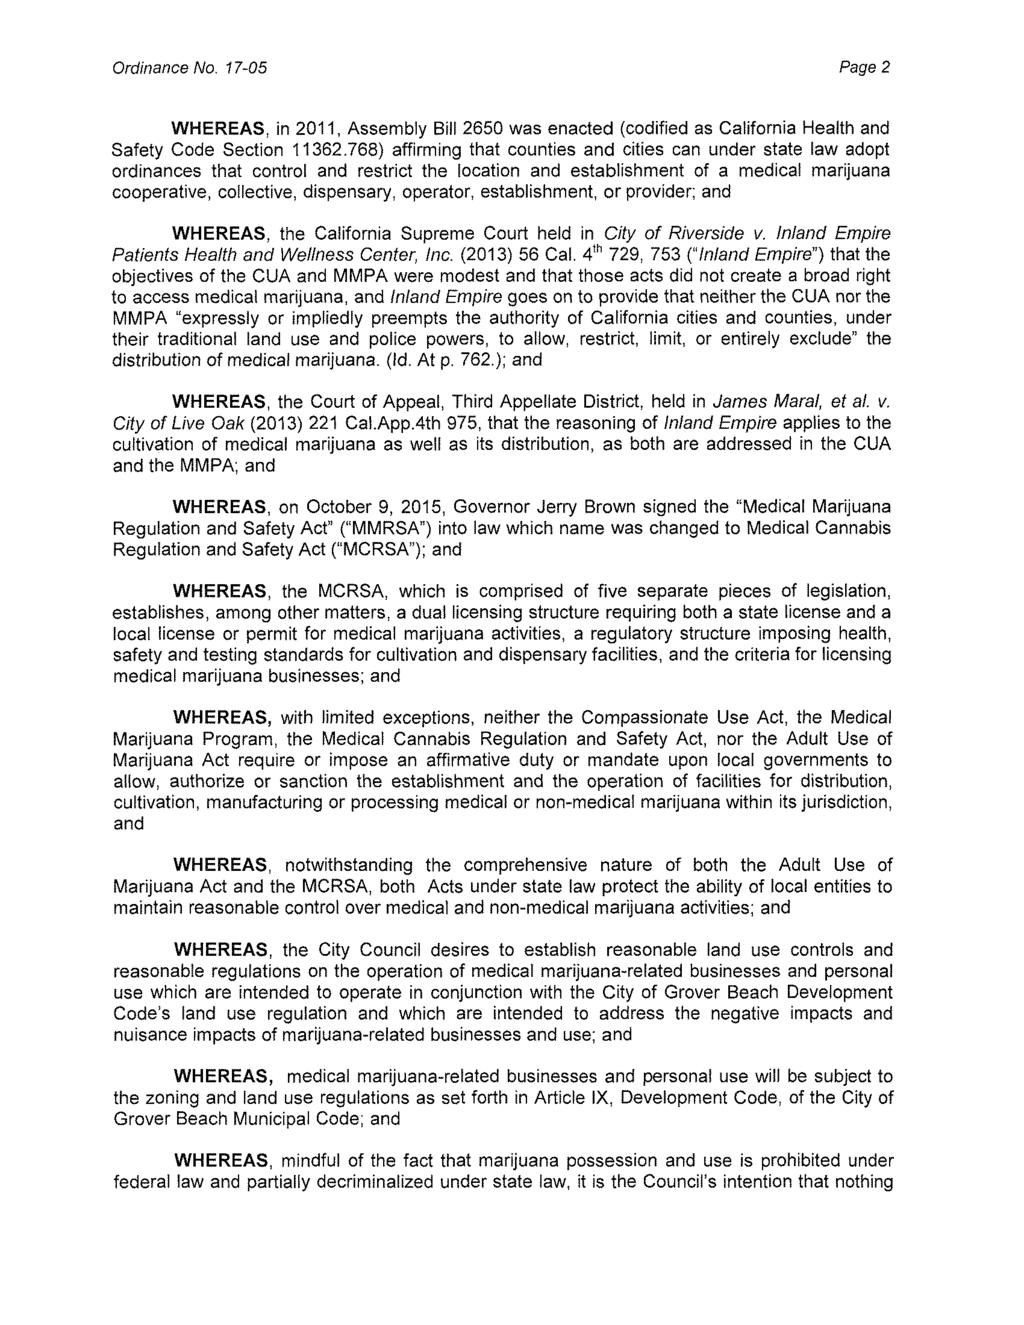 Ordinance No. 17-05 Page 2 WHEREAS, in 2011, Assembly Bill 2650 was enacted (codified as California Health and Safety Code Section 11362.